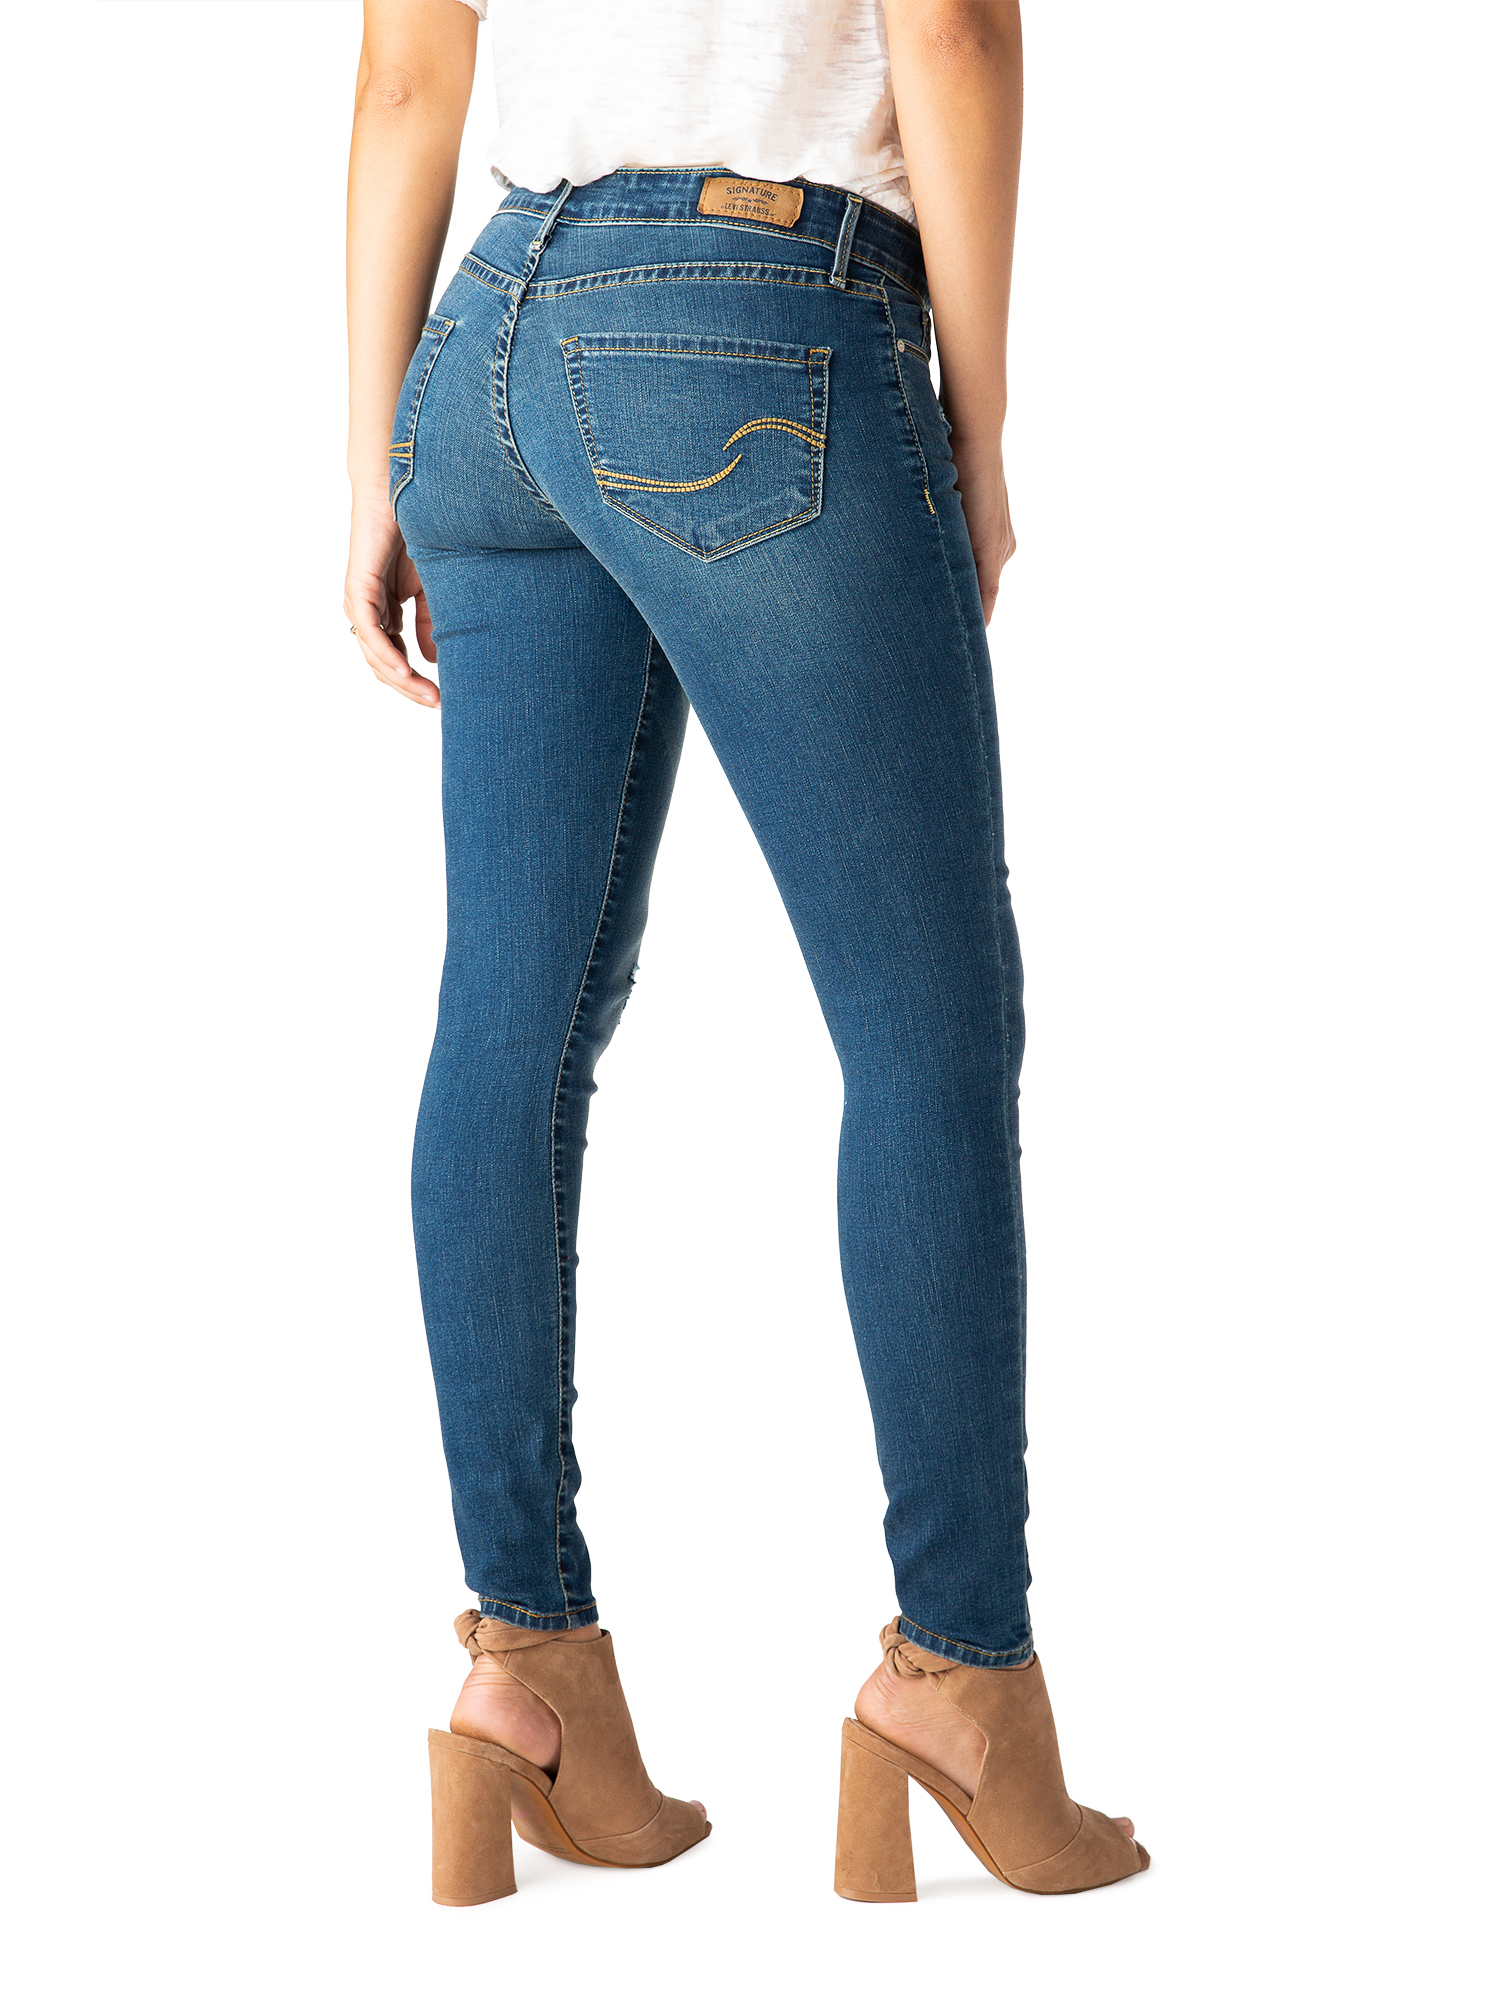 Signature by Levi Strauss & Co. Women's Low Rise Jeggings - image 4 of 12